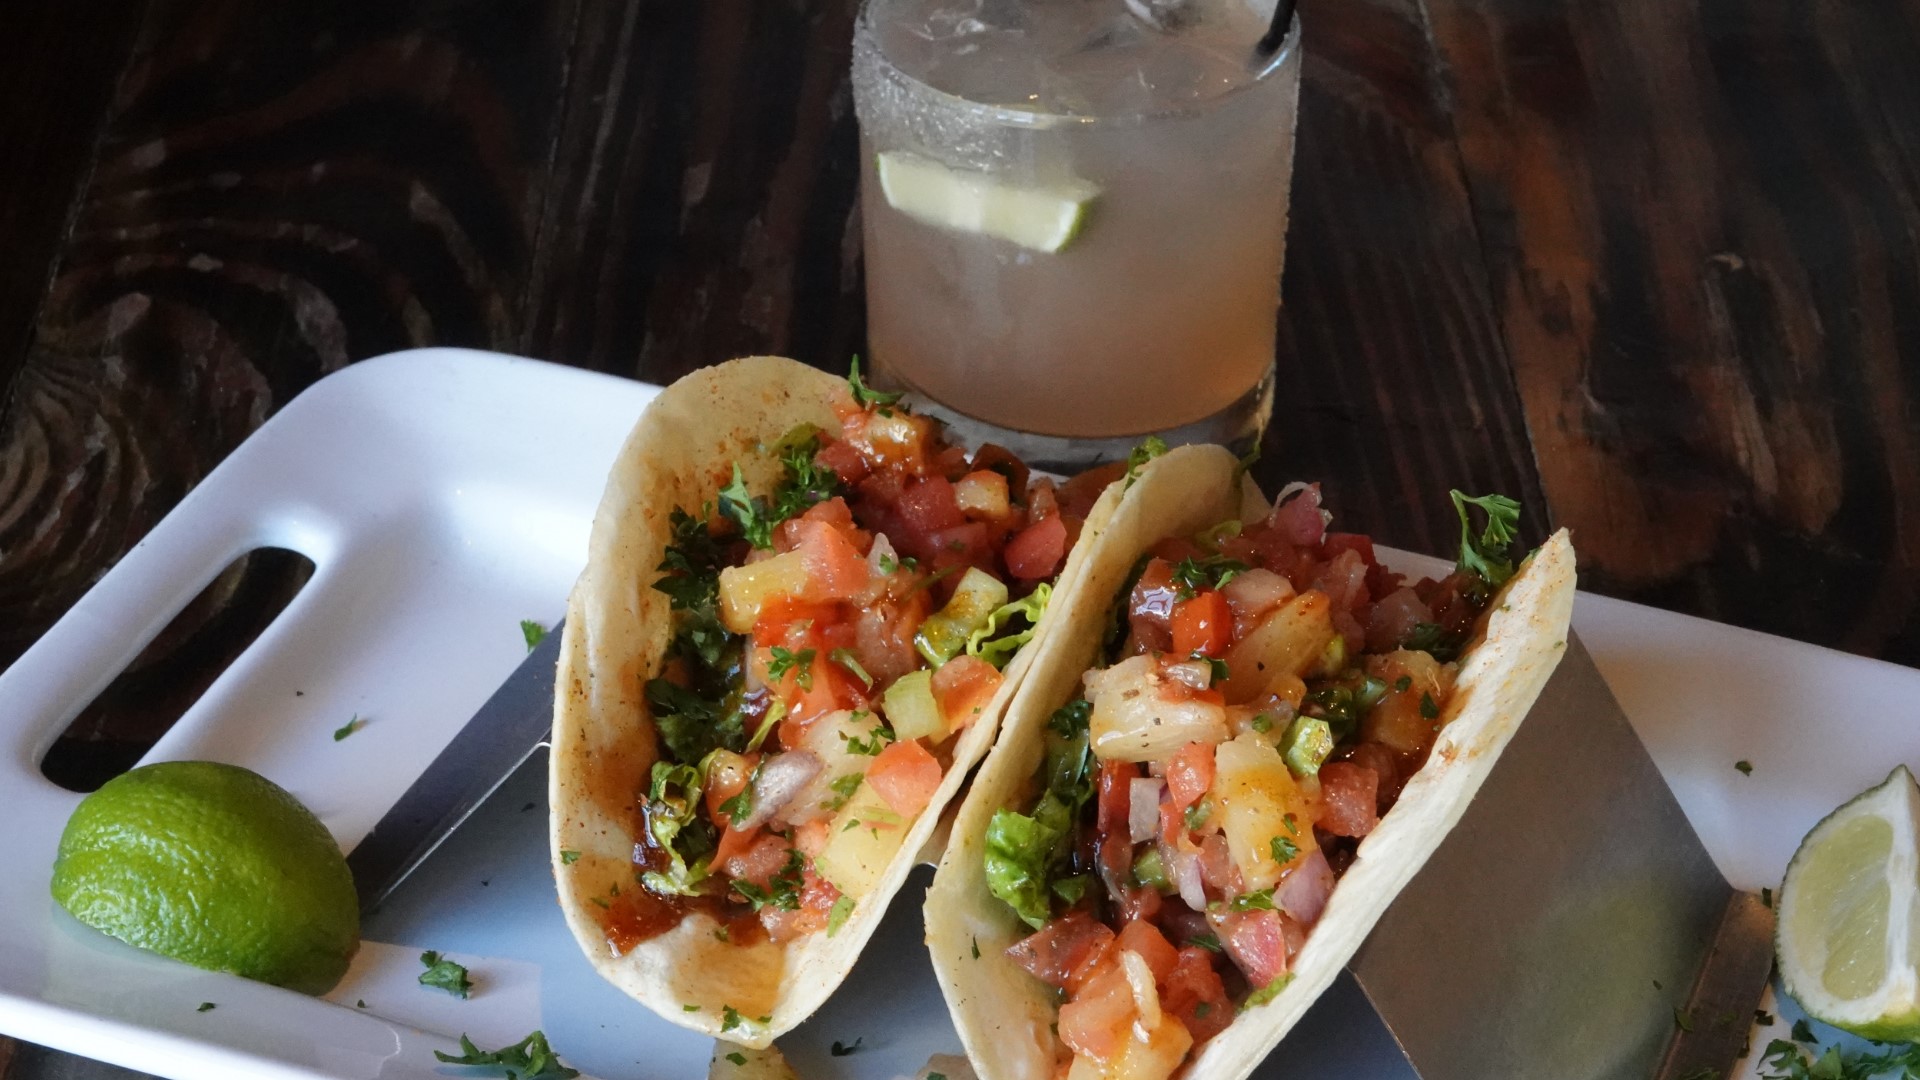 Bearfoot Tavern is one of the restaurants on the crawl, and will be serving up tasty tacos and drinks.